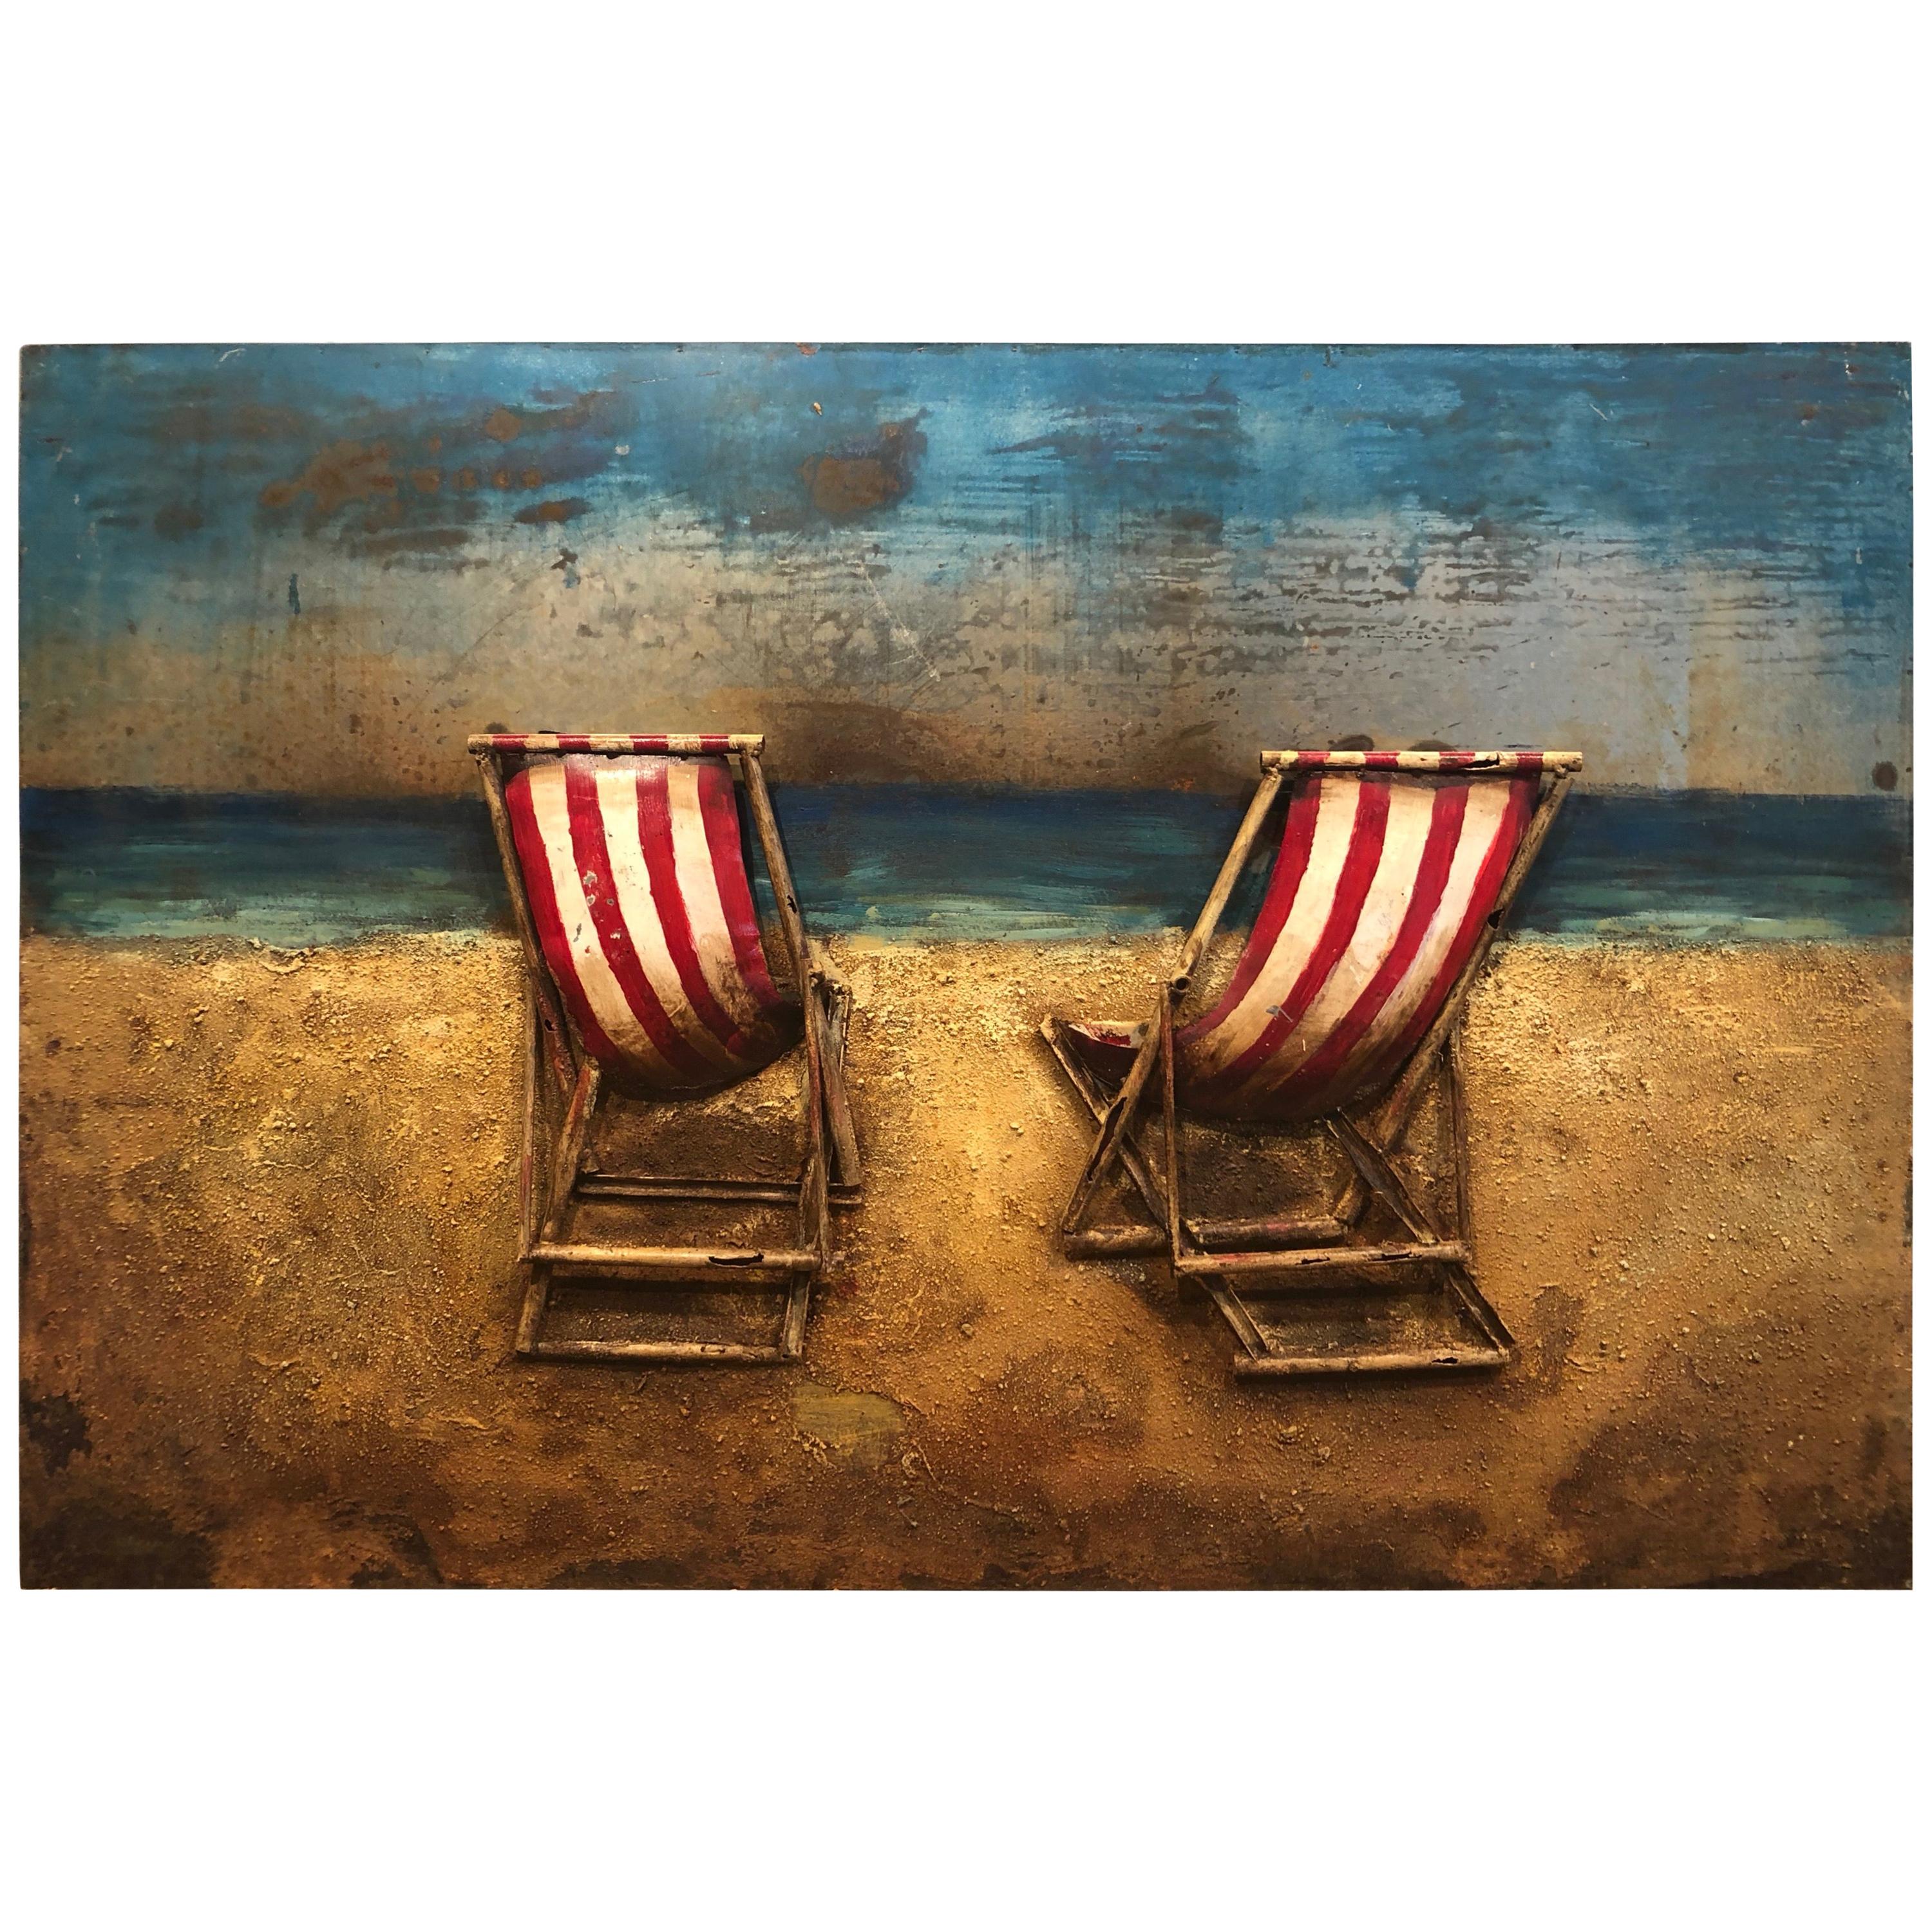 Three-Dimensional Metal and Acrylic Painting of Beach Chairs by the Seaside